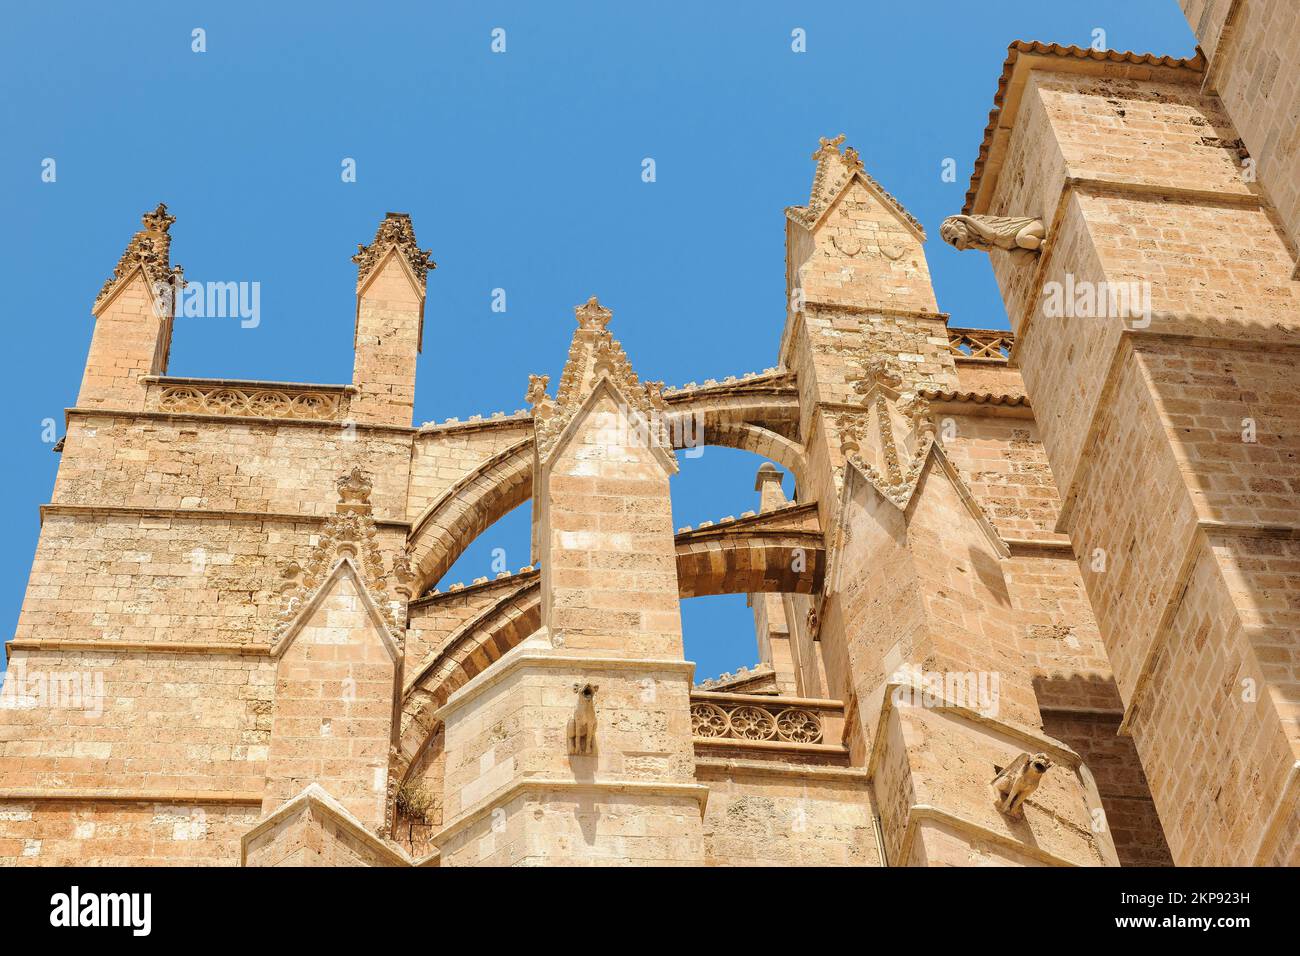 Architectural details turret cross braces for dissipation of weight pressure at gothic cathedral of St. Mary La Seu in gothic architectural style goth Stock Photo